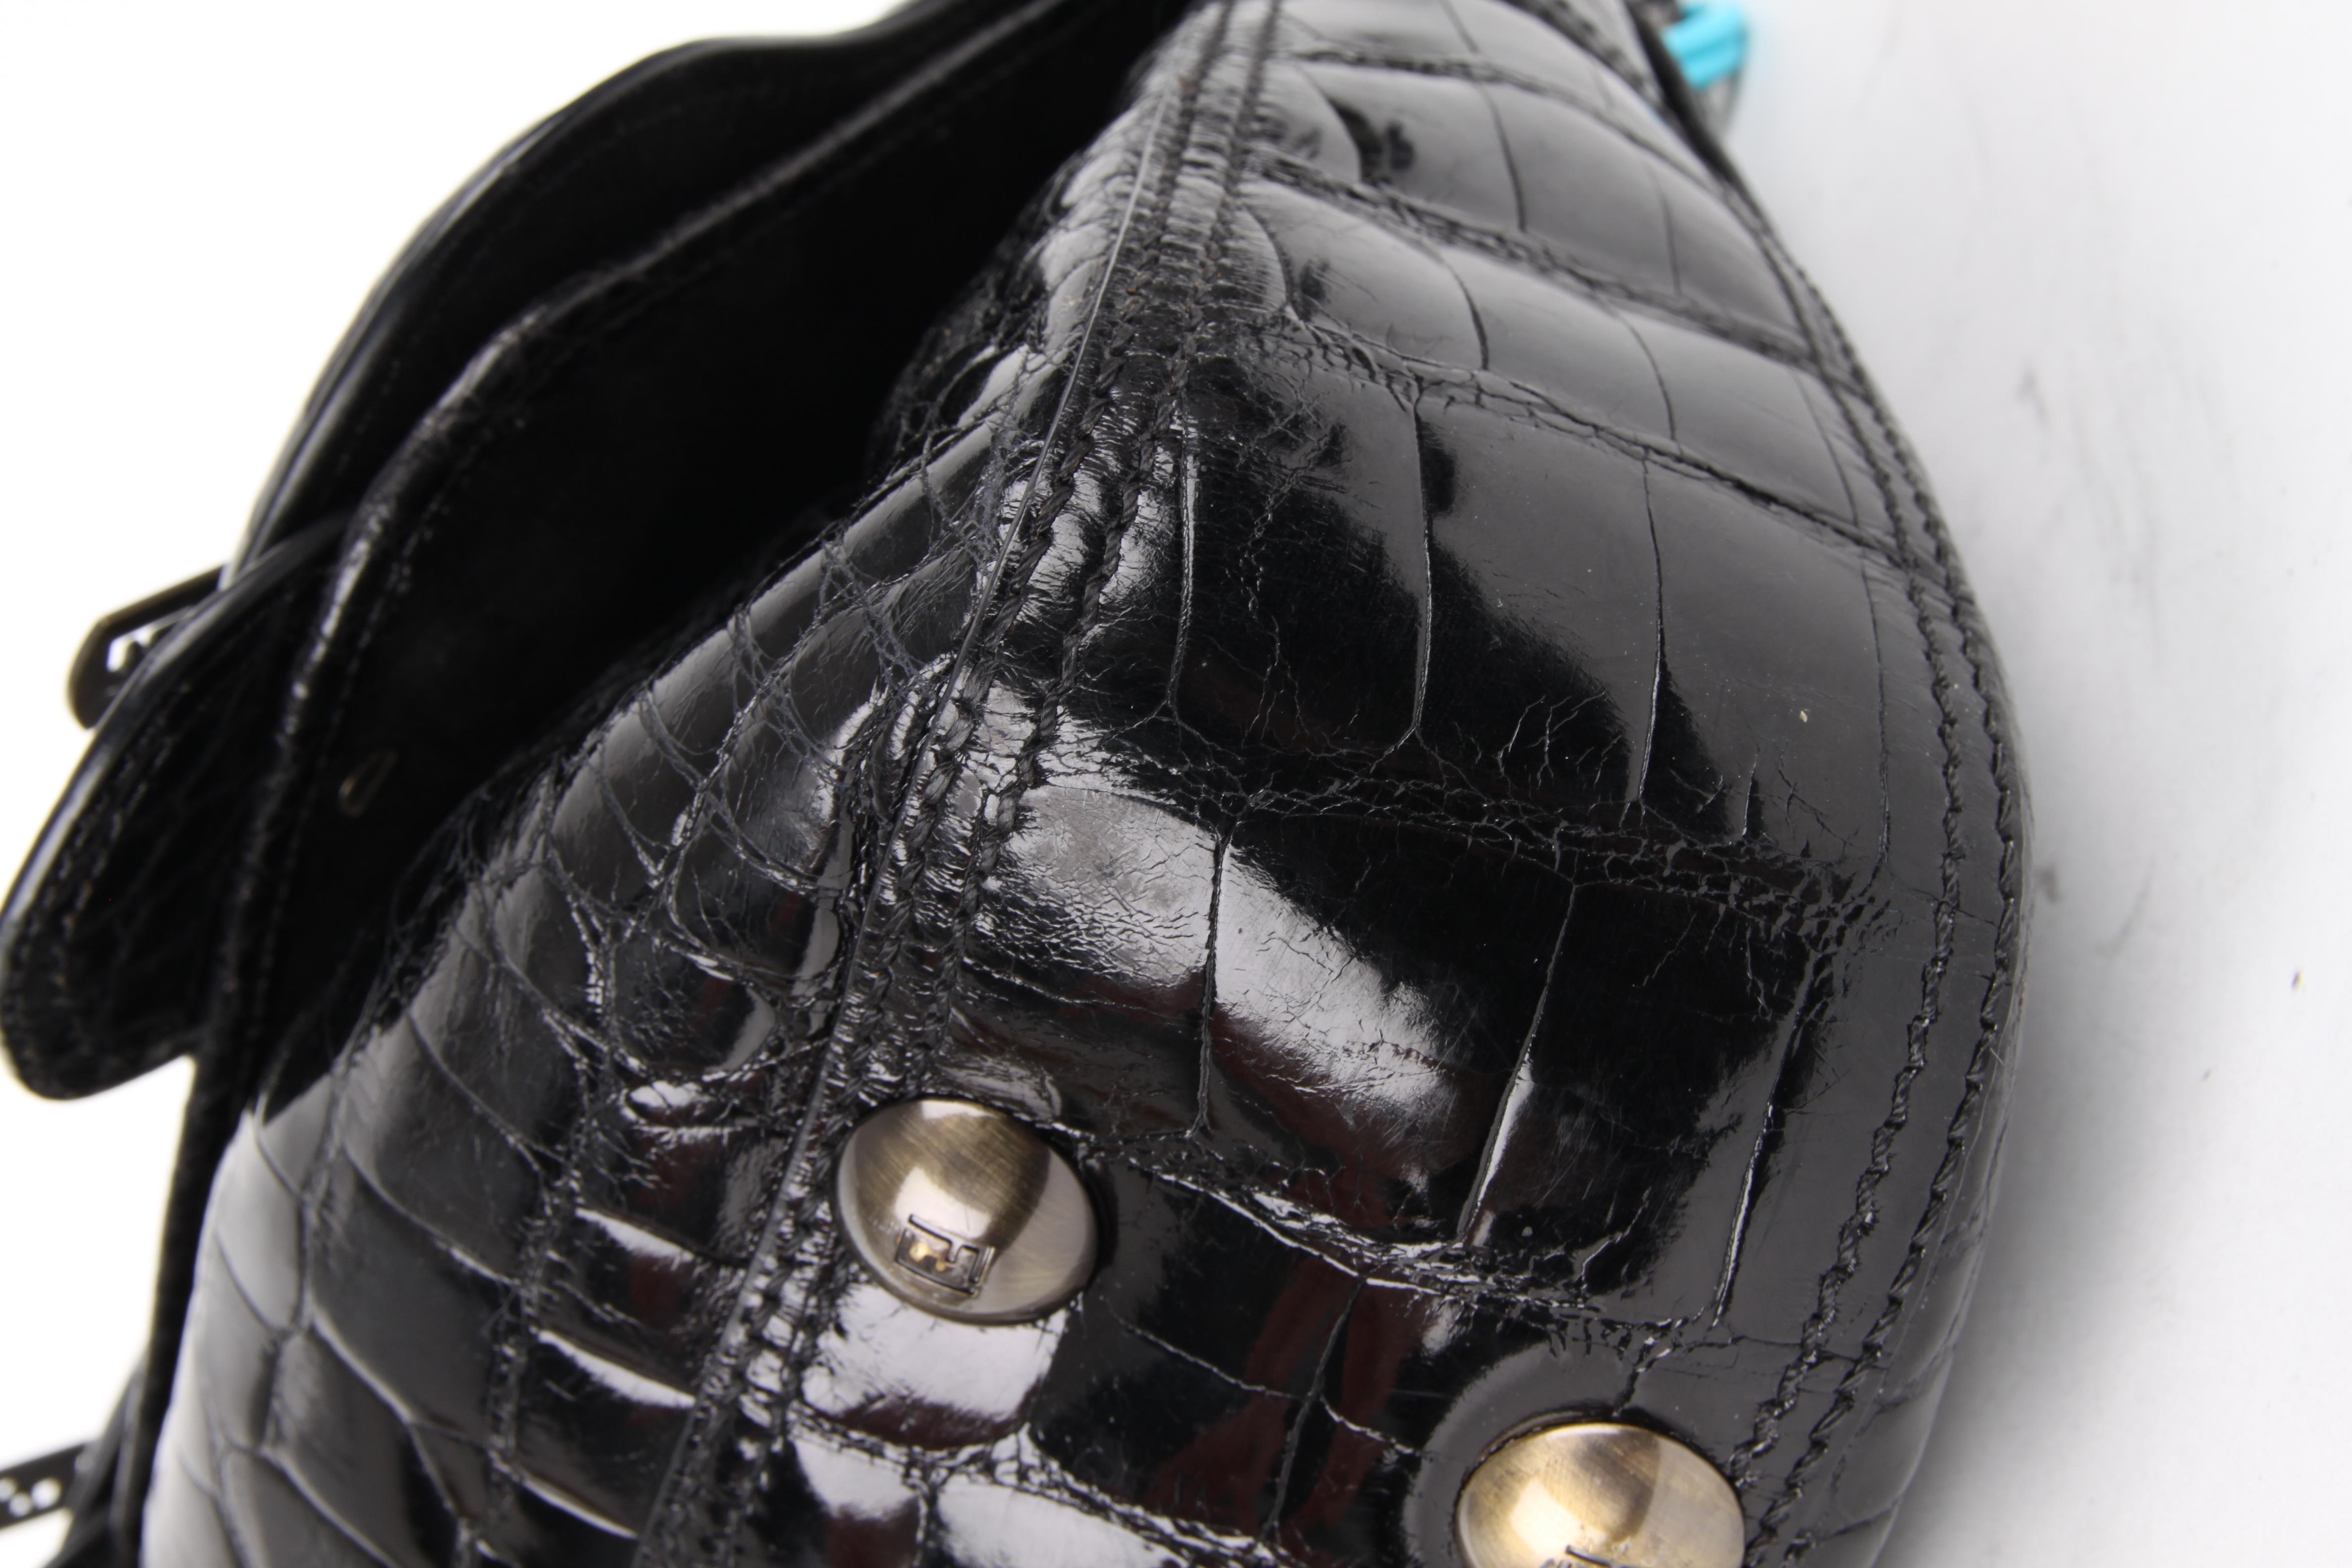   Fendi S/S 2006 Black  Leather B-Bag With Turquoise Chain Straps  For Sale 3